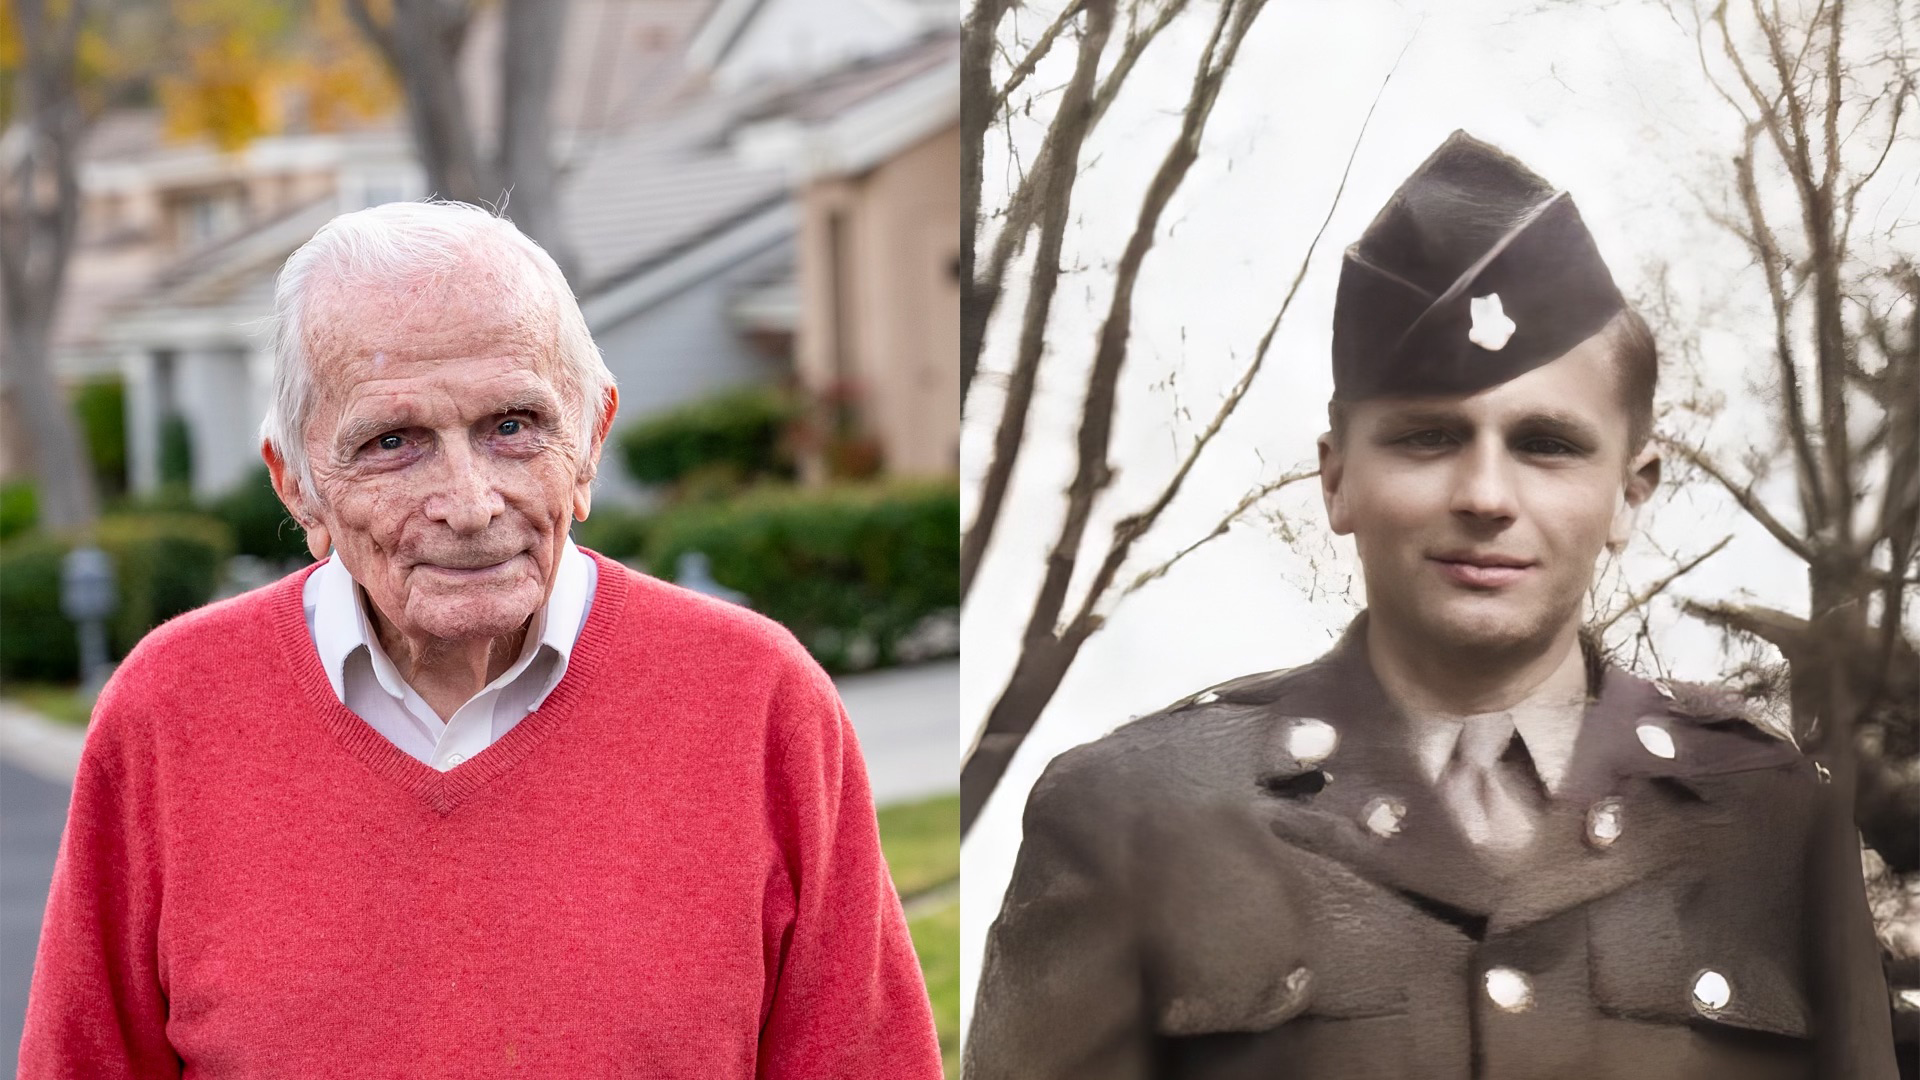 Side by side images of a World War II veteran today and during service.